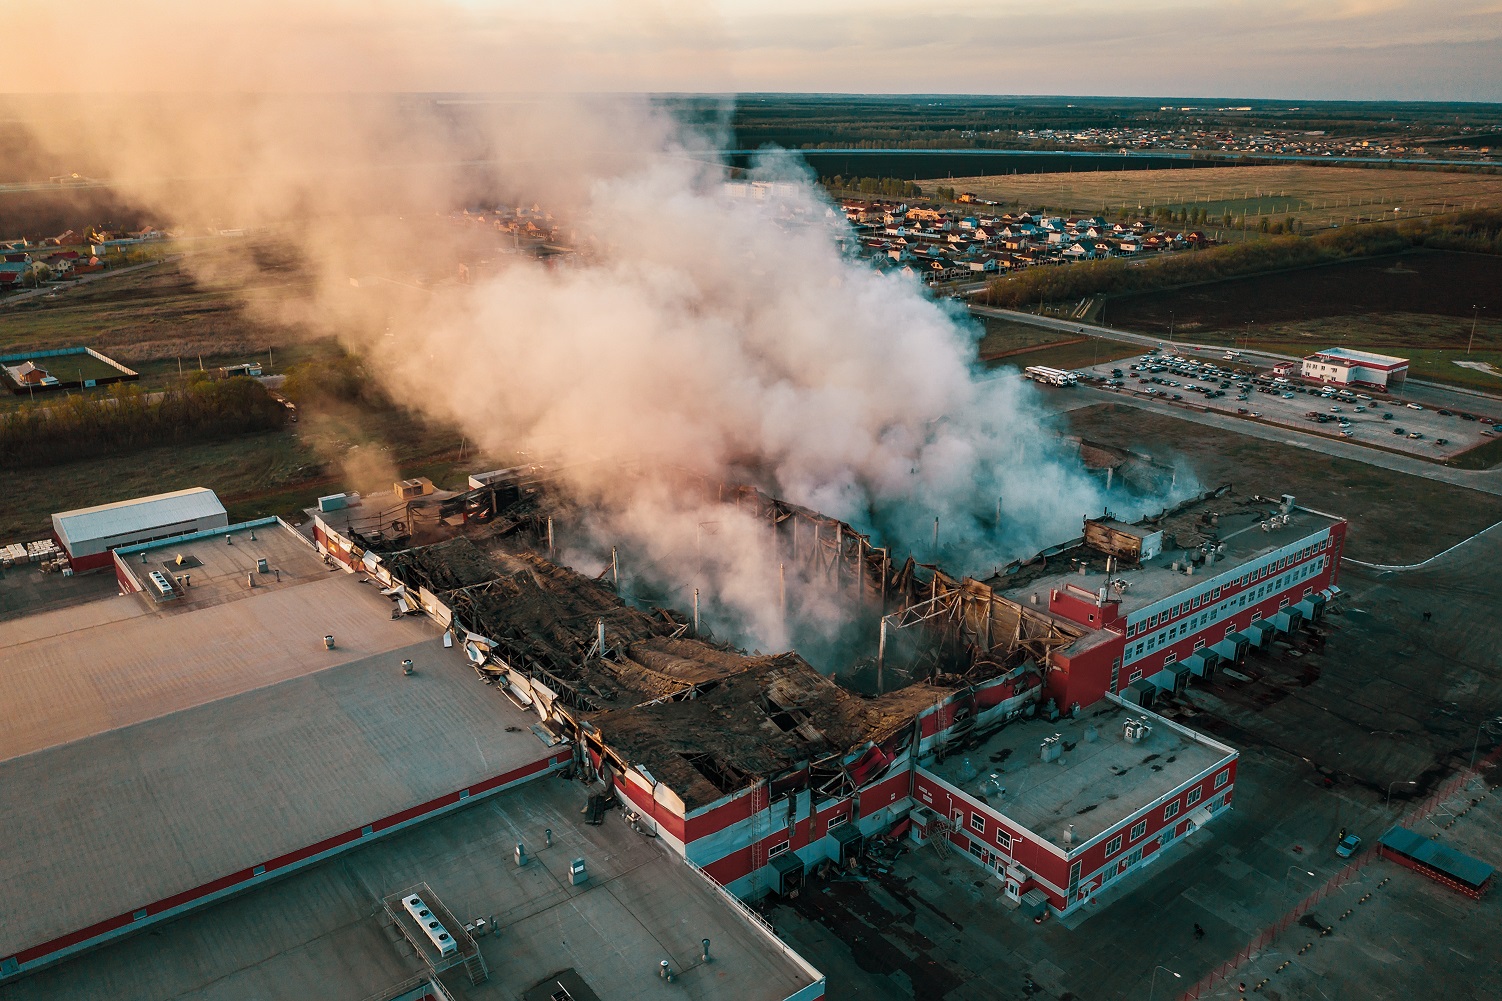 Causes of Fires in Manufacturing Plants